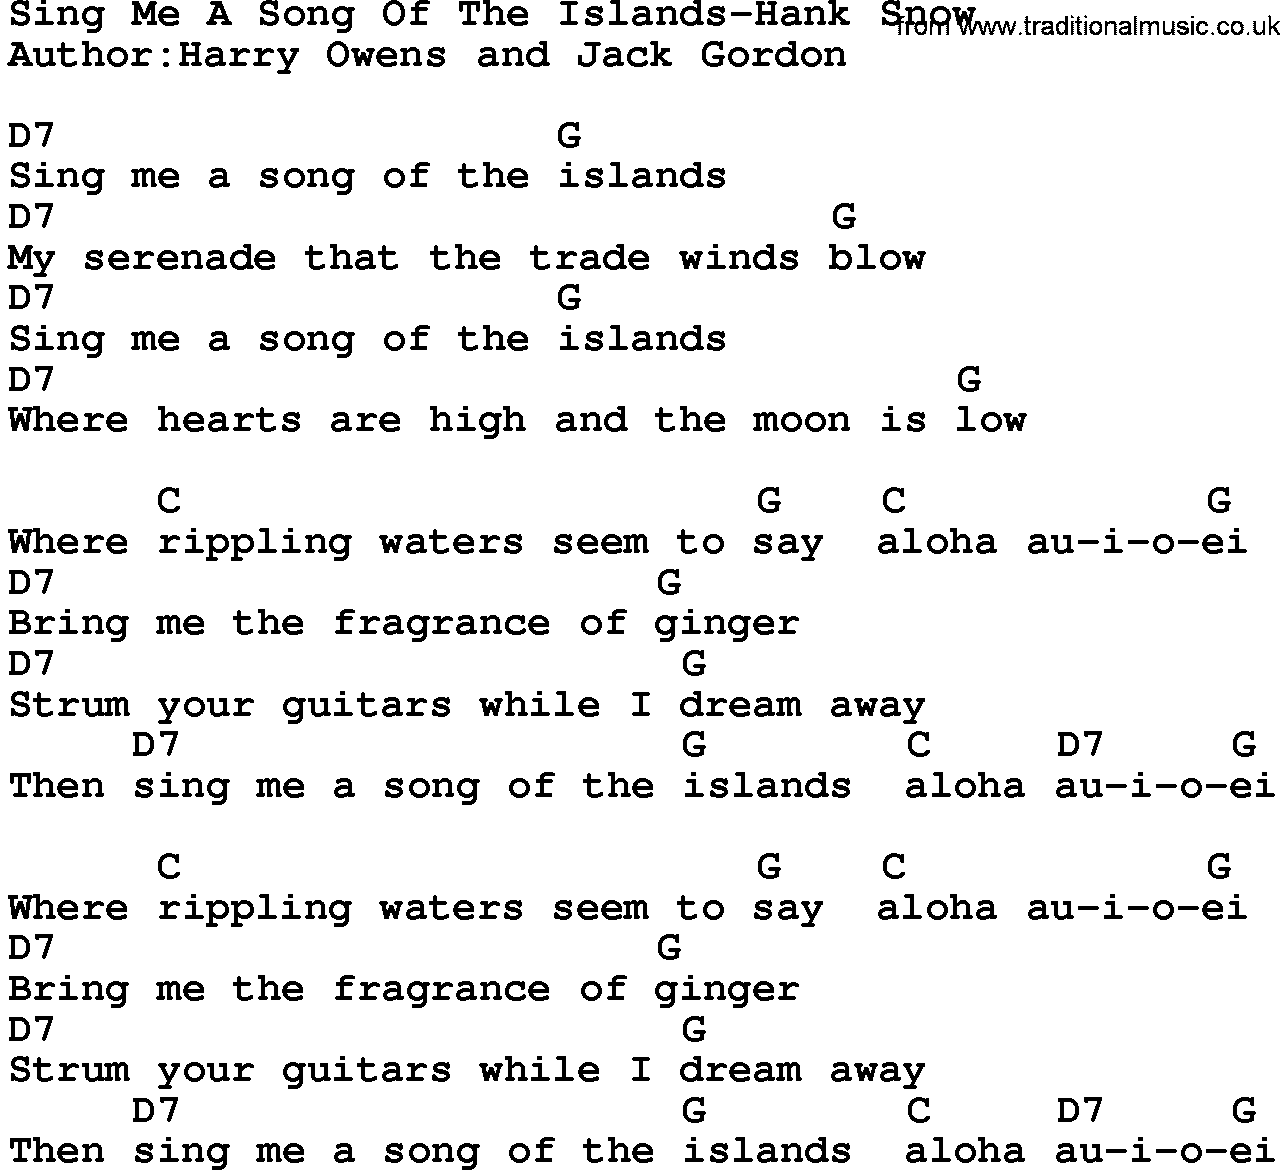 Country music song: Sing Me A Song Of The Islands-Hank Snow lyrics and chords